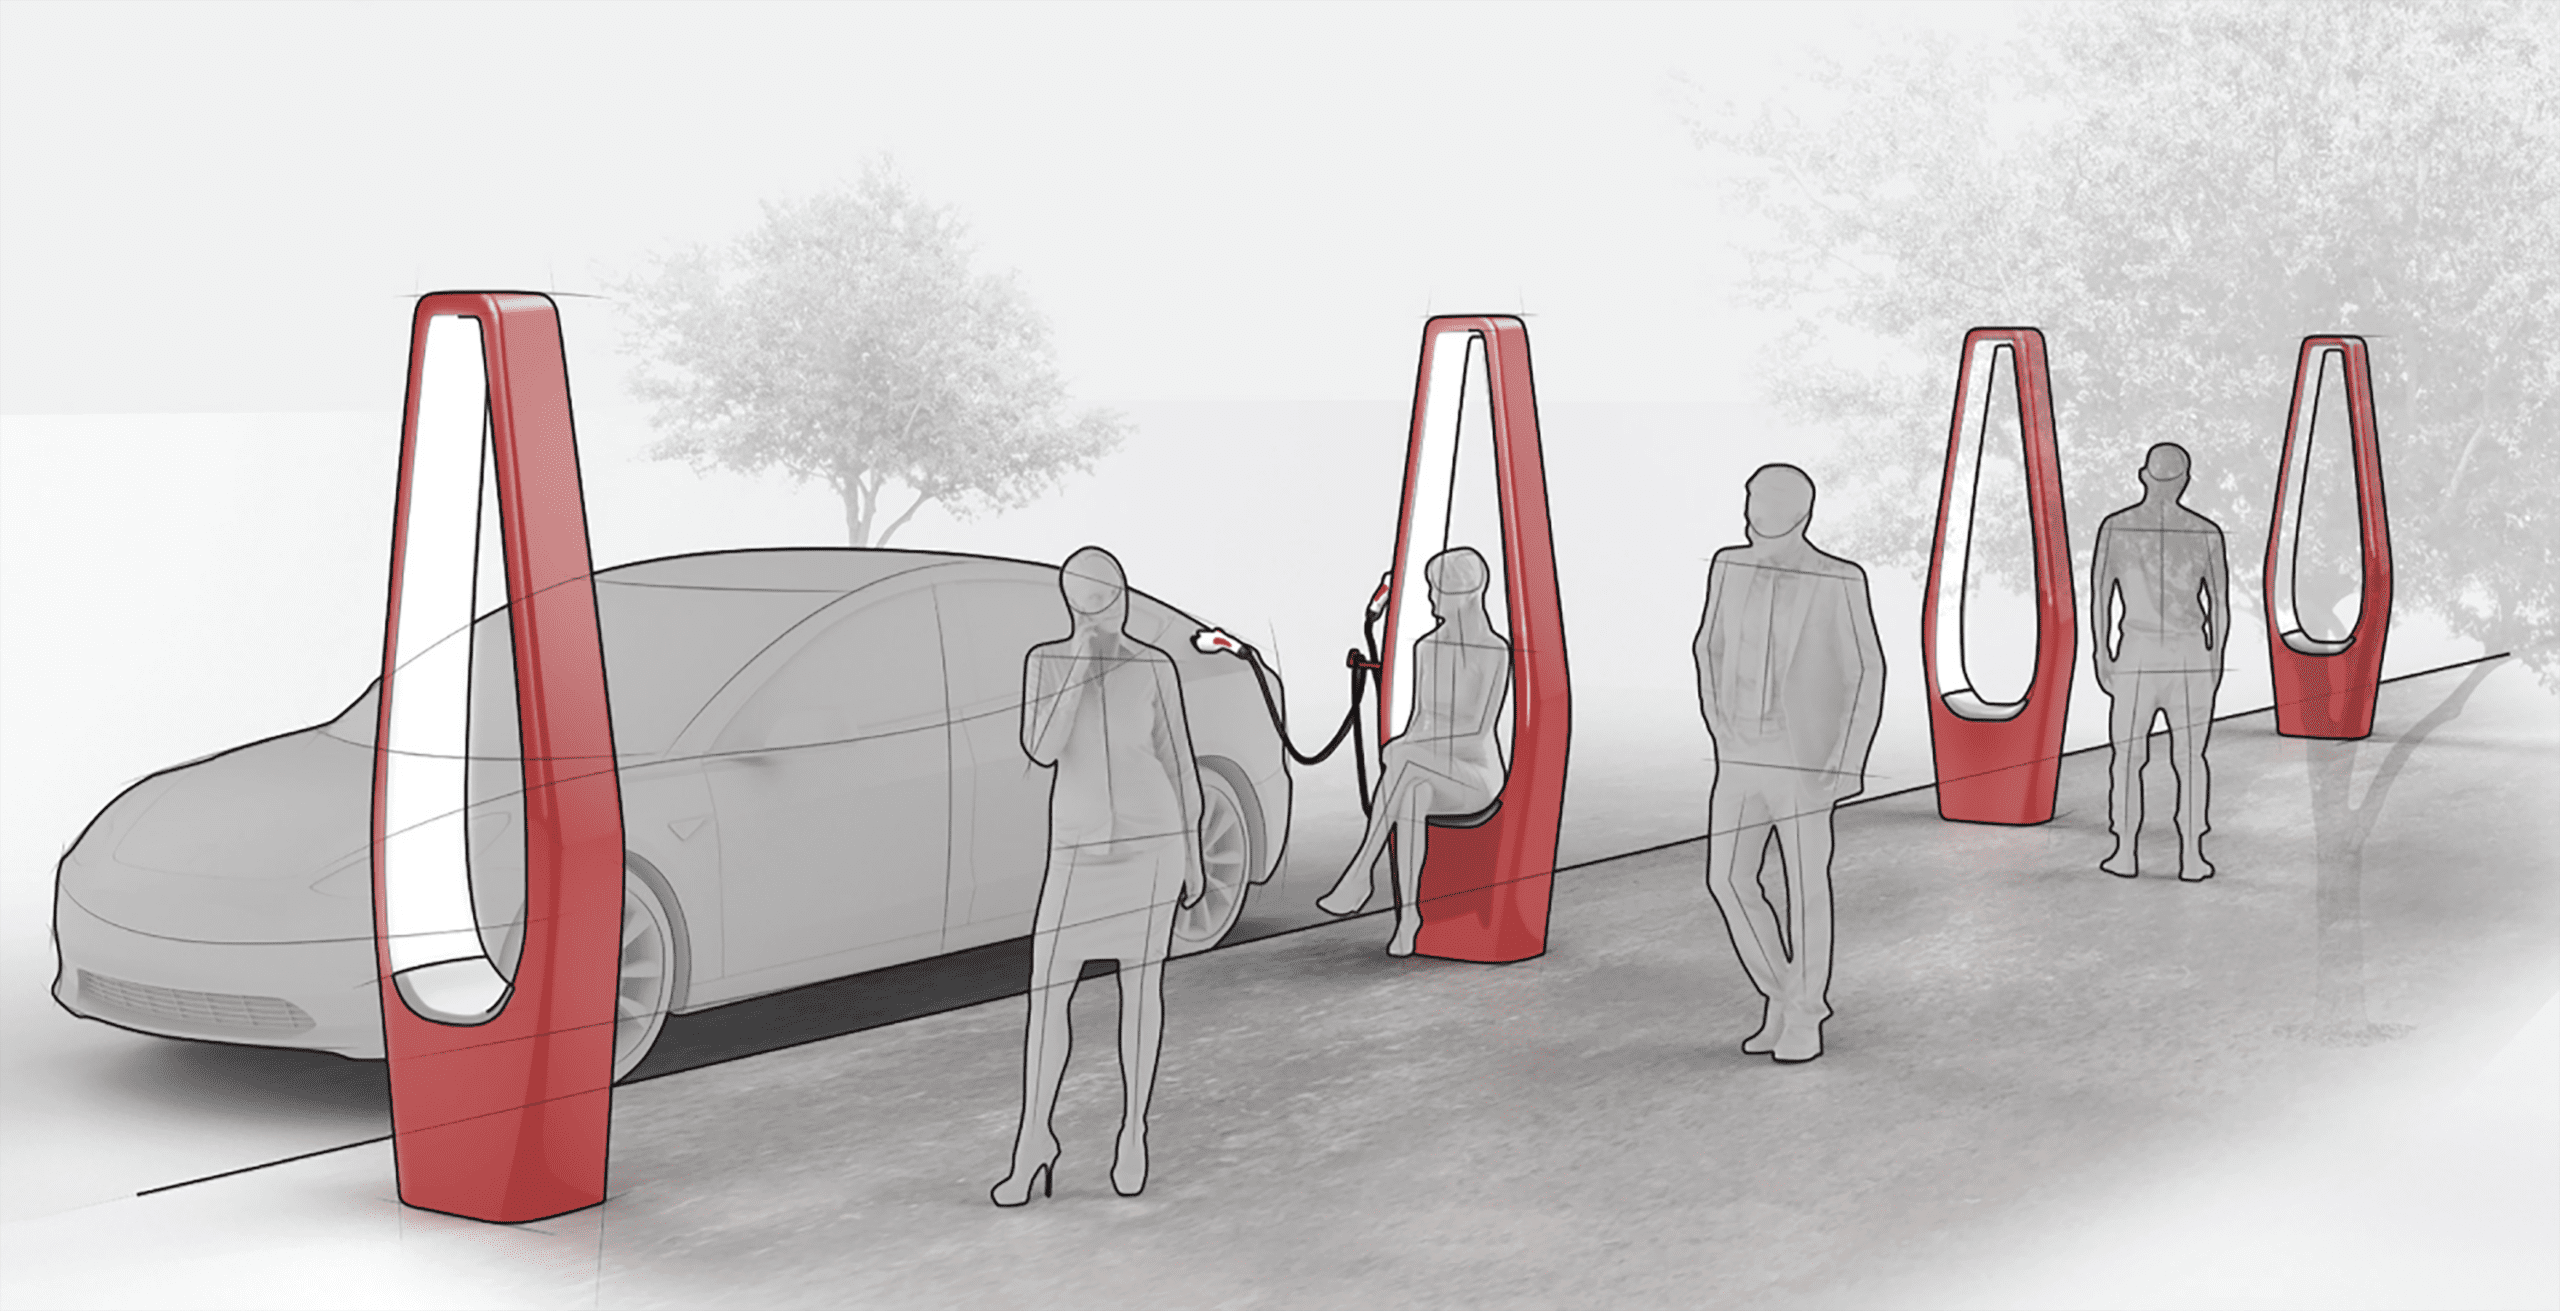 Digital image of four people standing at an Exxon charging station with one car and two trees. The four orange charging stations are long, tall, and slightly oval shaped. The rest of the image is a simple outline with grey, slightly transparent coloring.